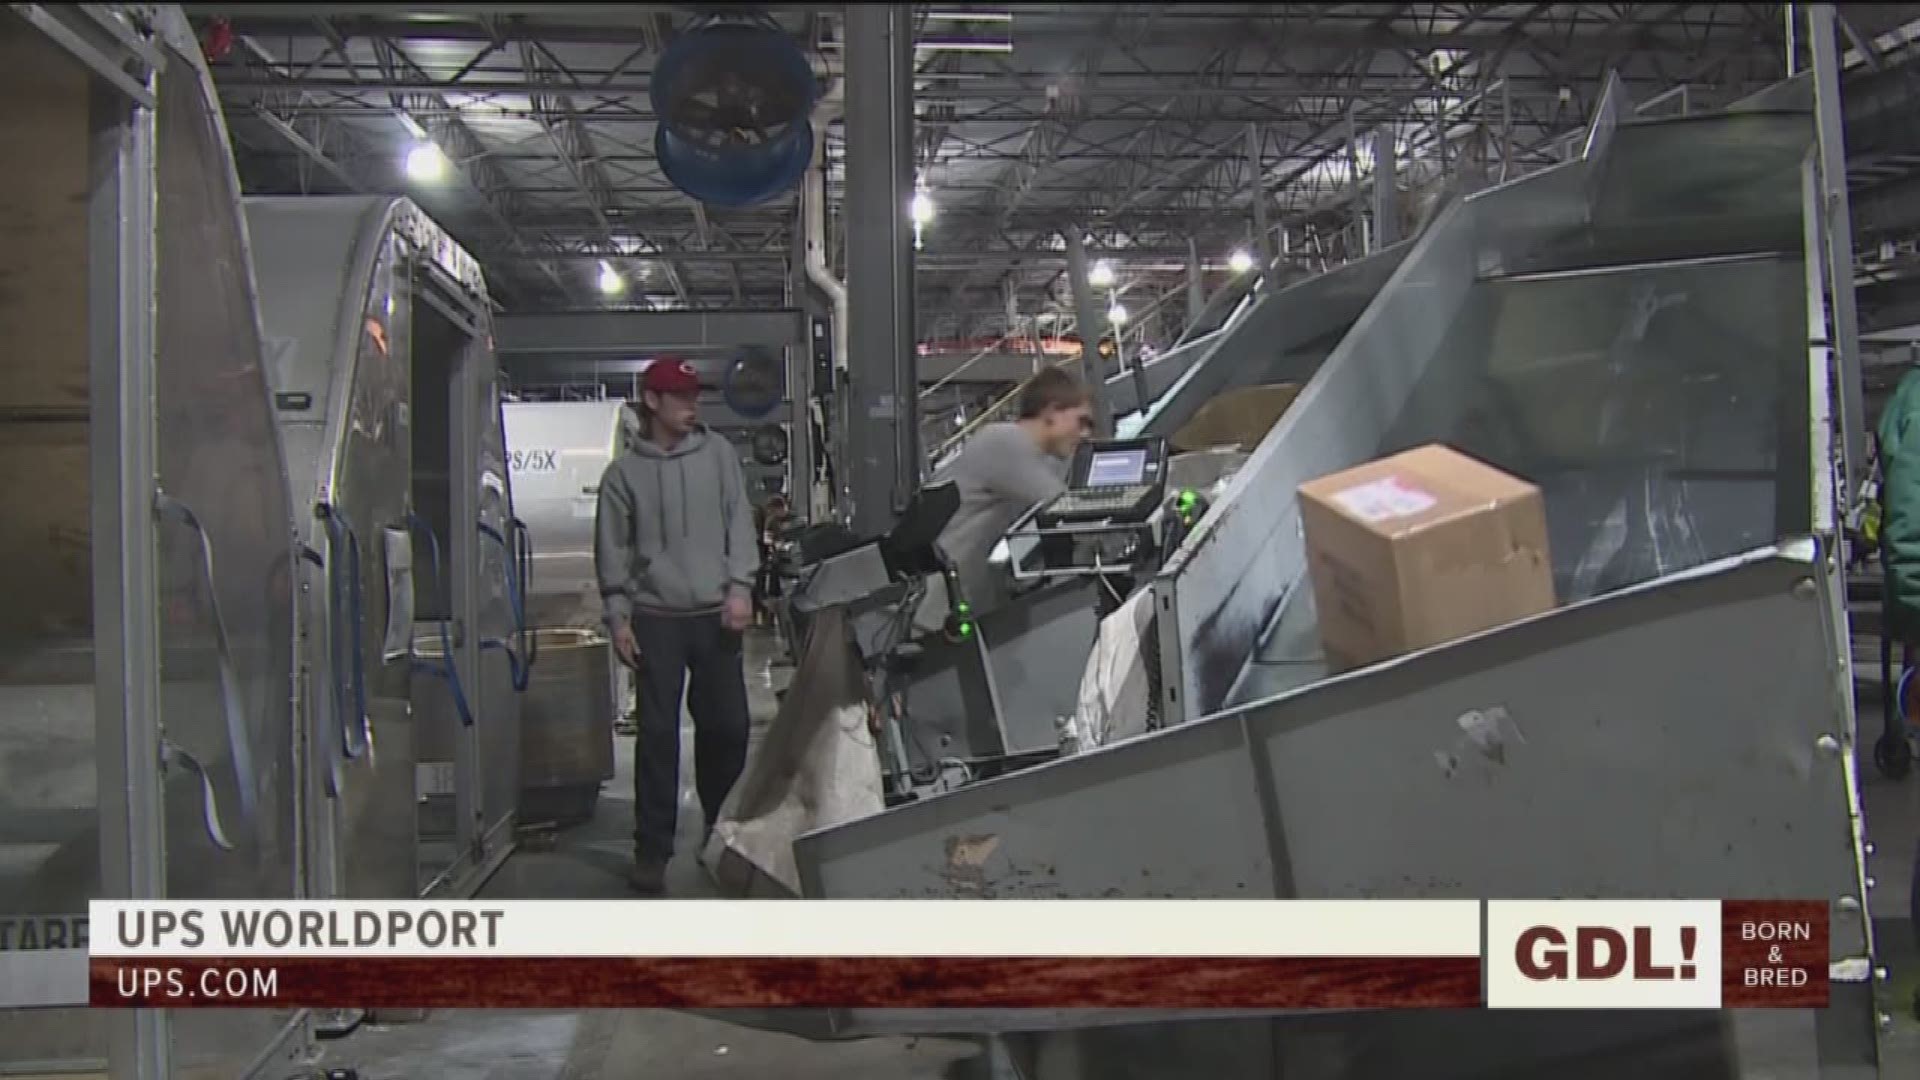 Anne Doyle gets a behind the scenes look at the UPS Worldport.